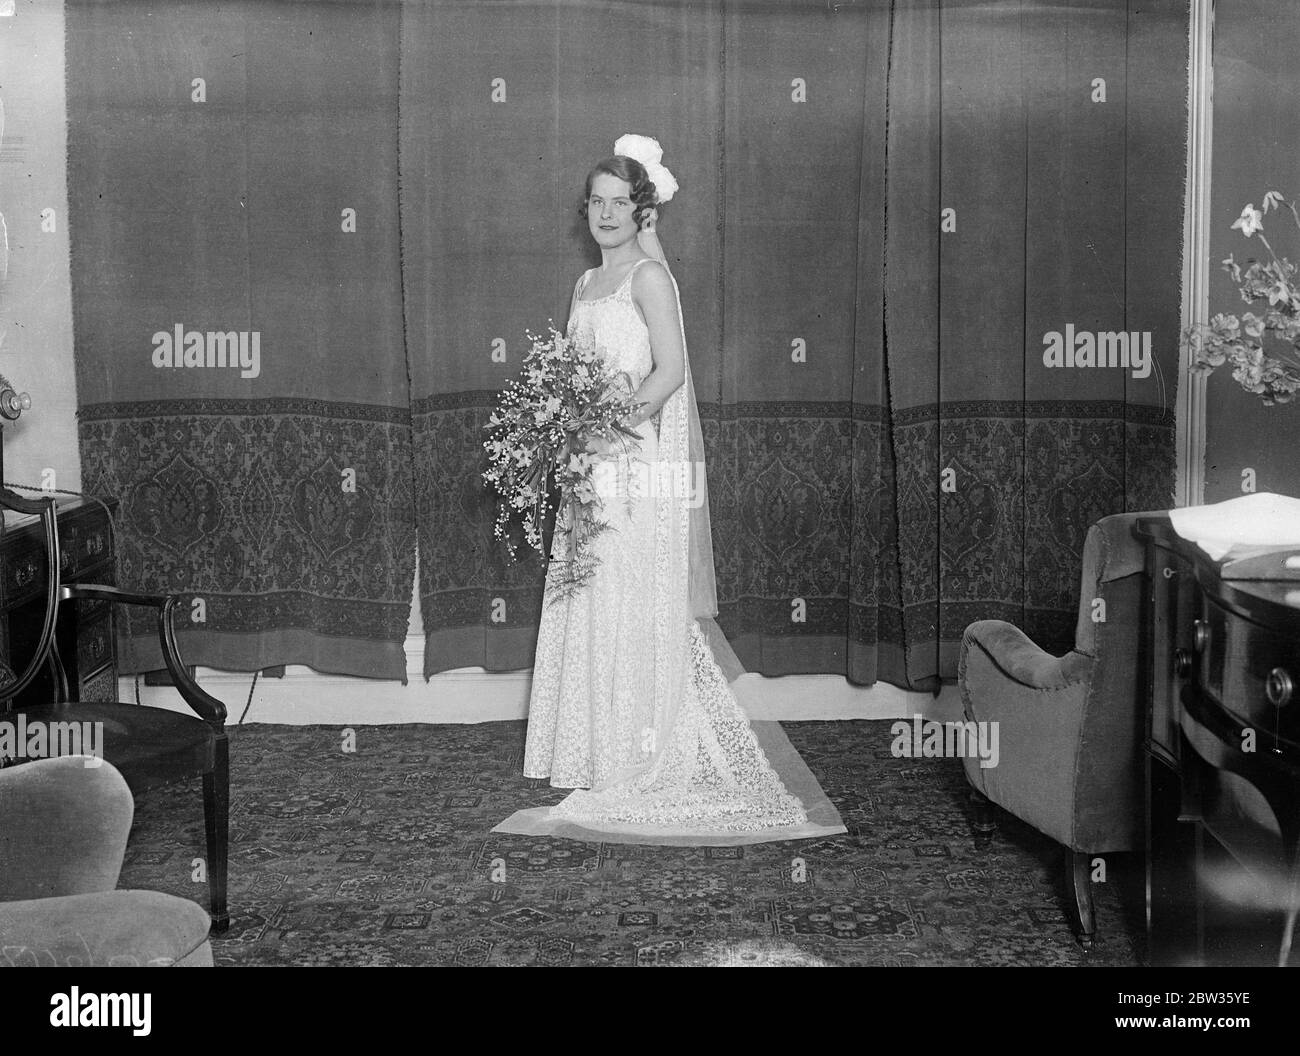 American girl to be presented at court . Miss Hannah Locke of Philadelphia , the daughter of Mrs Robert W Locke , who is among the American girls to be presented at Court by Mrs Ray Atherton , wife of the American Charge d ' Affaires . She is photographed in her gown before leaving to attend the first Court presentation at which she made her bow to the Queen , The King was unable to be present on account of rheumatism . Miss Locke ' s gown was of white lace trimmed with a dull blue taffeta belt and shoulder straps , worn with a train of white lace . Her bouquet was of white orchids and lilies Stock Photo